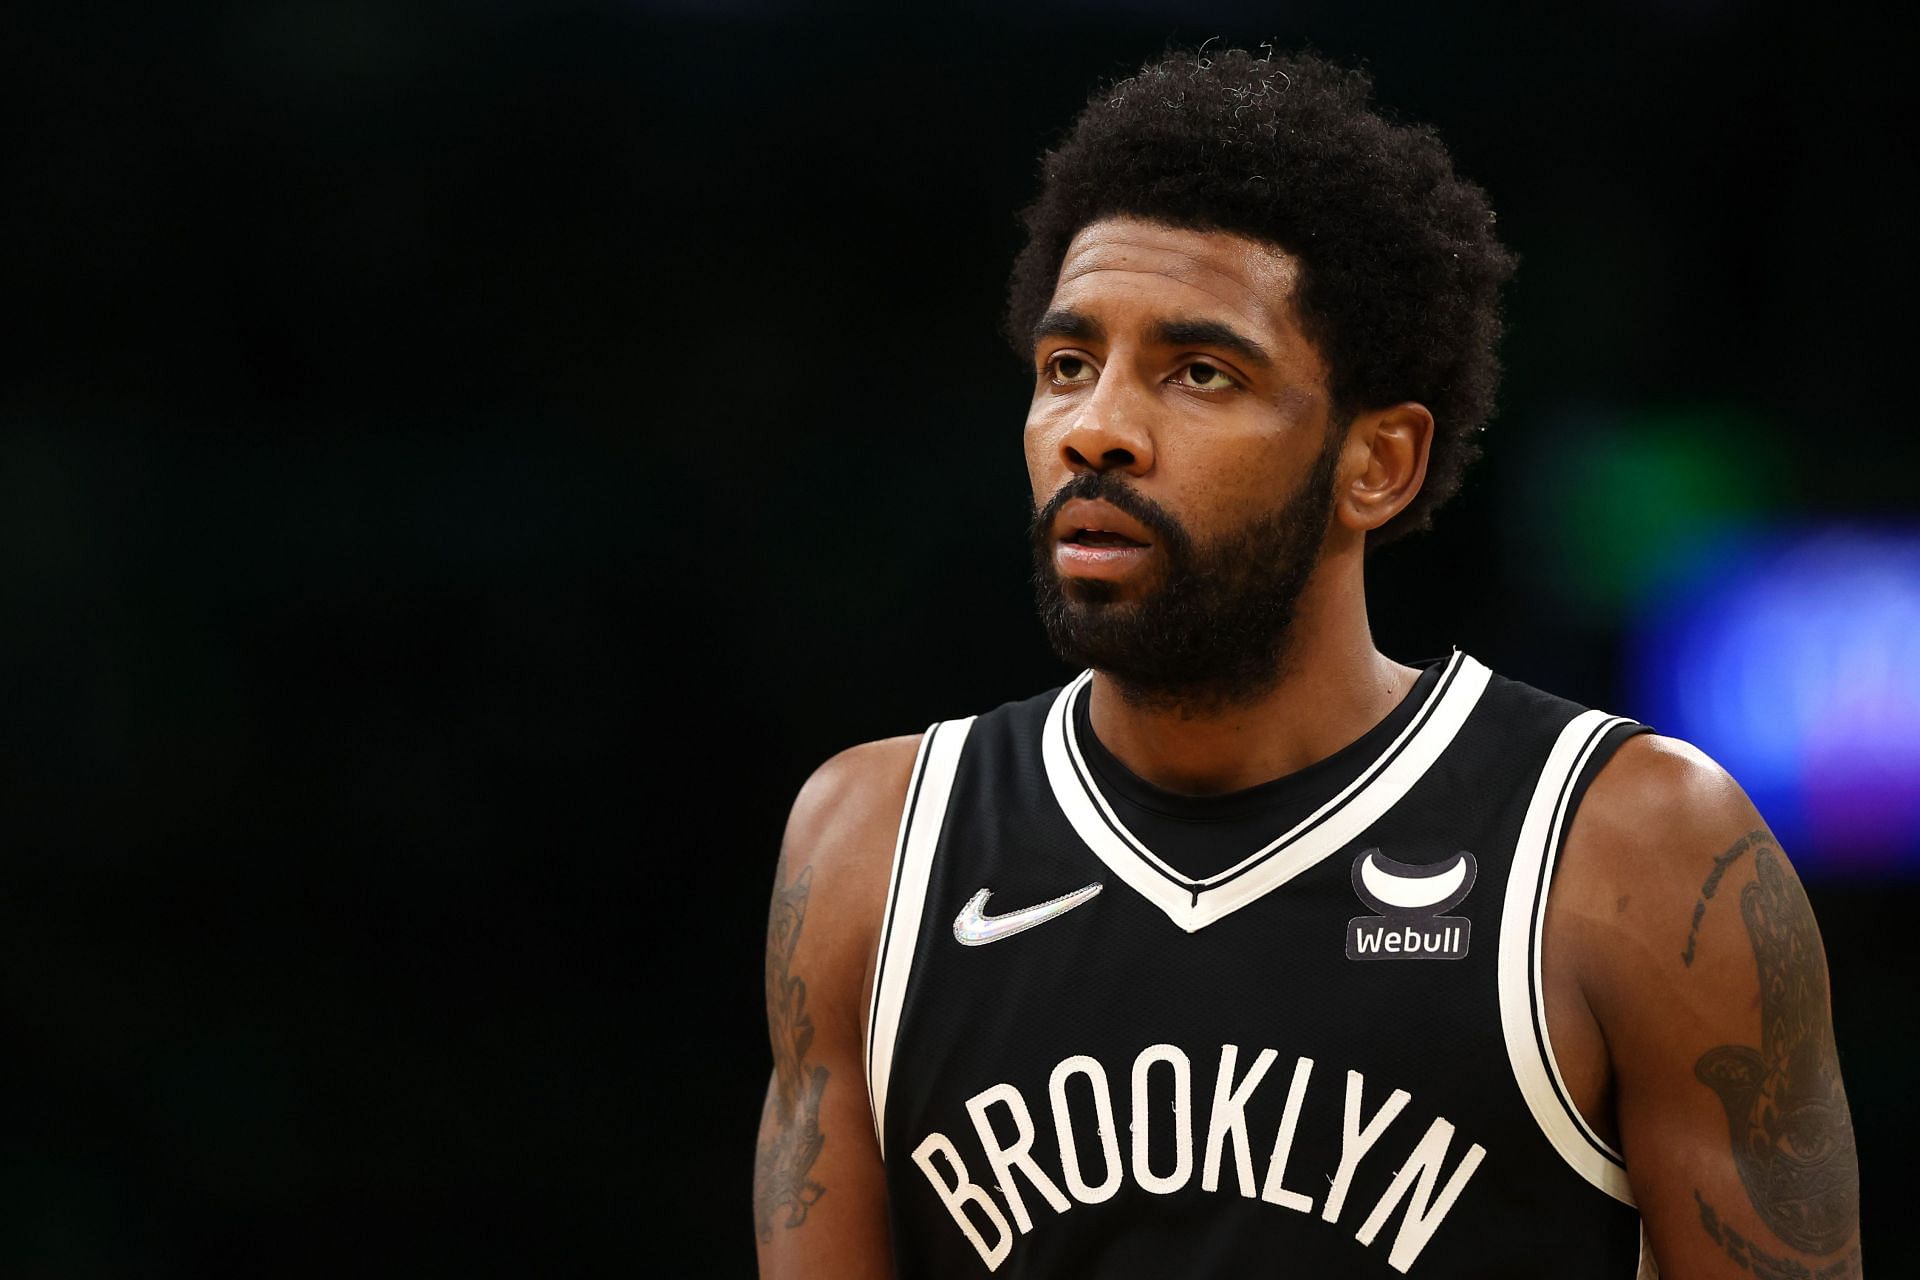 Former NBA champion Kyrie Irving is still dealing with his journey of self-discovery.